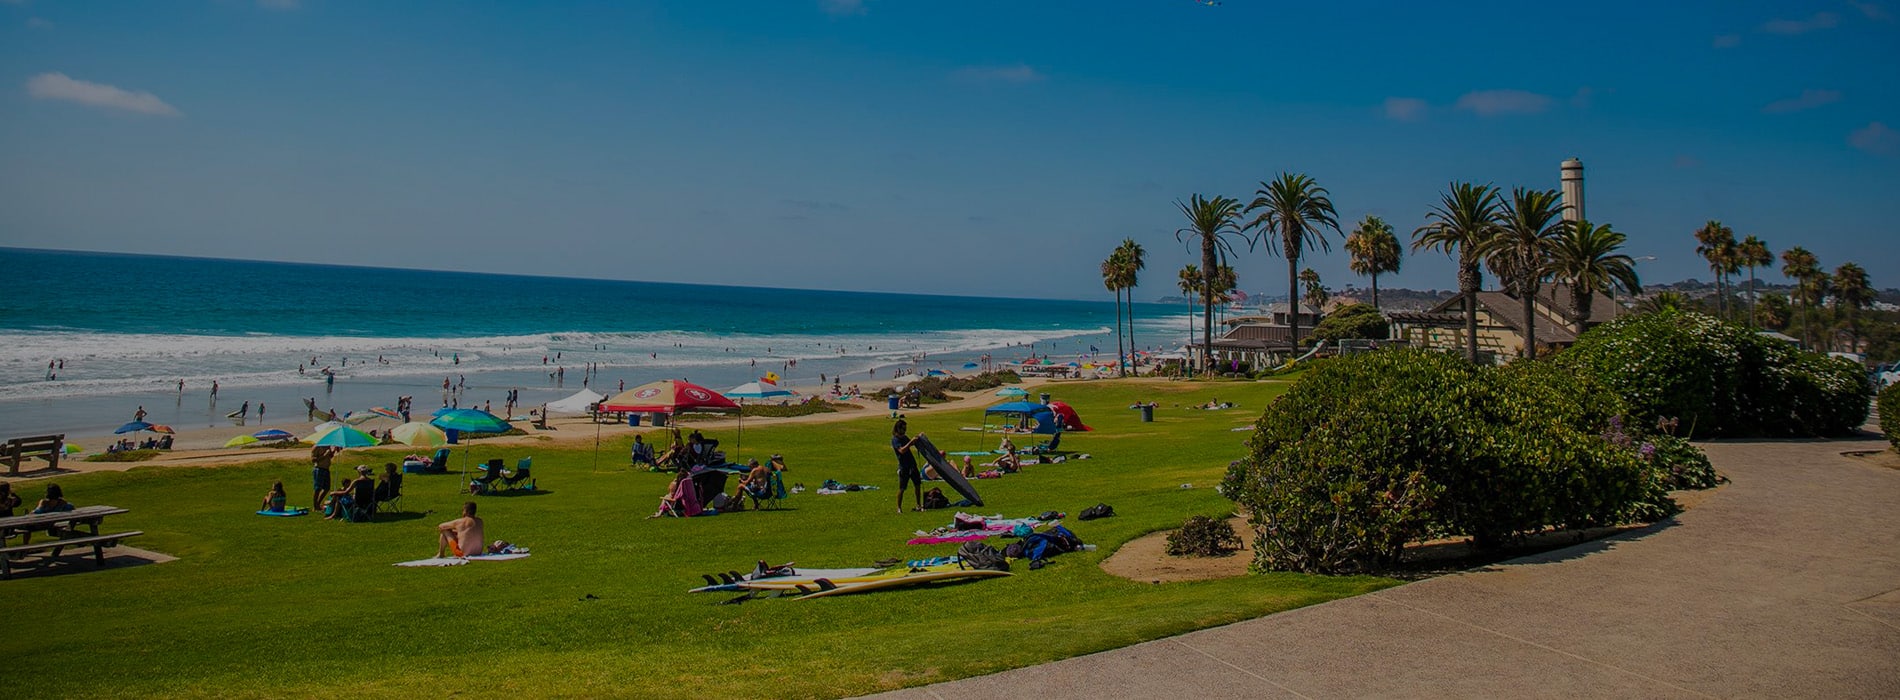 Del Mar City beachfront.Discover homes for sale opportunities with the best real estate agents